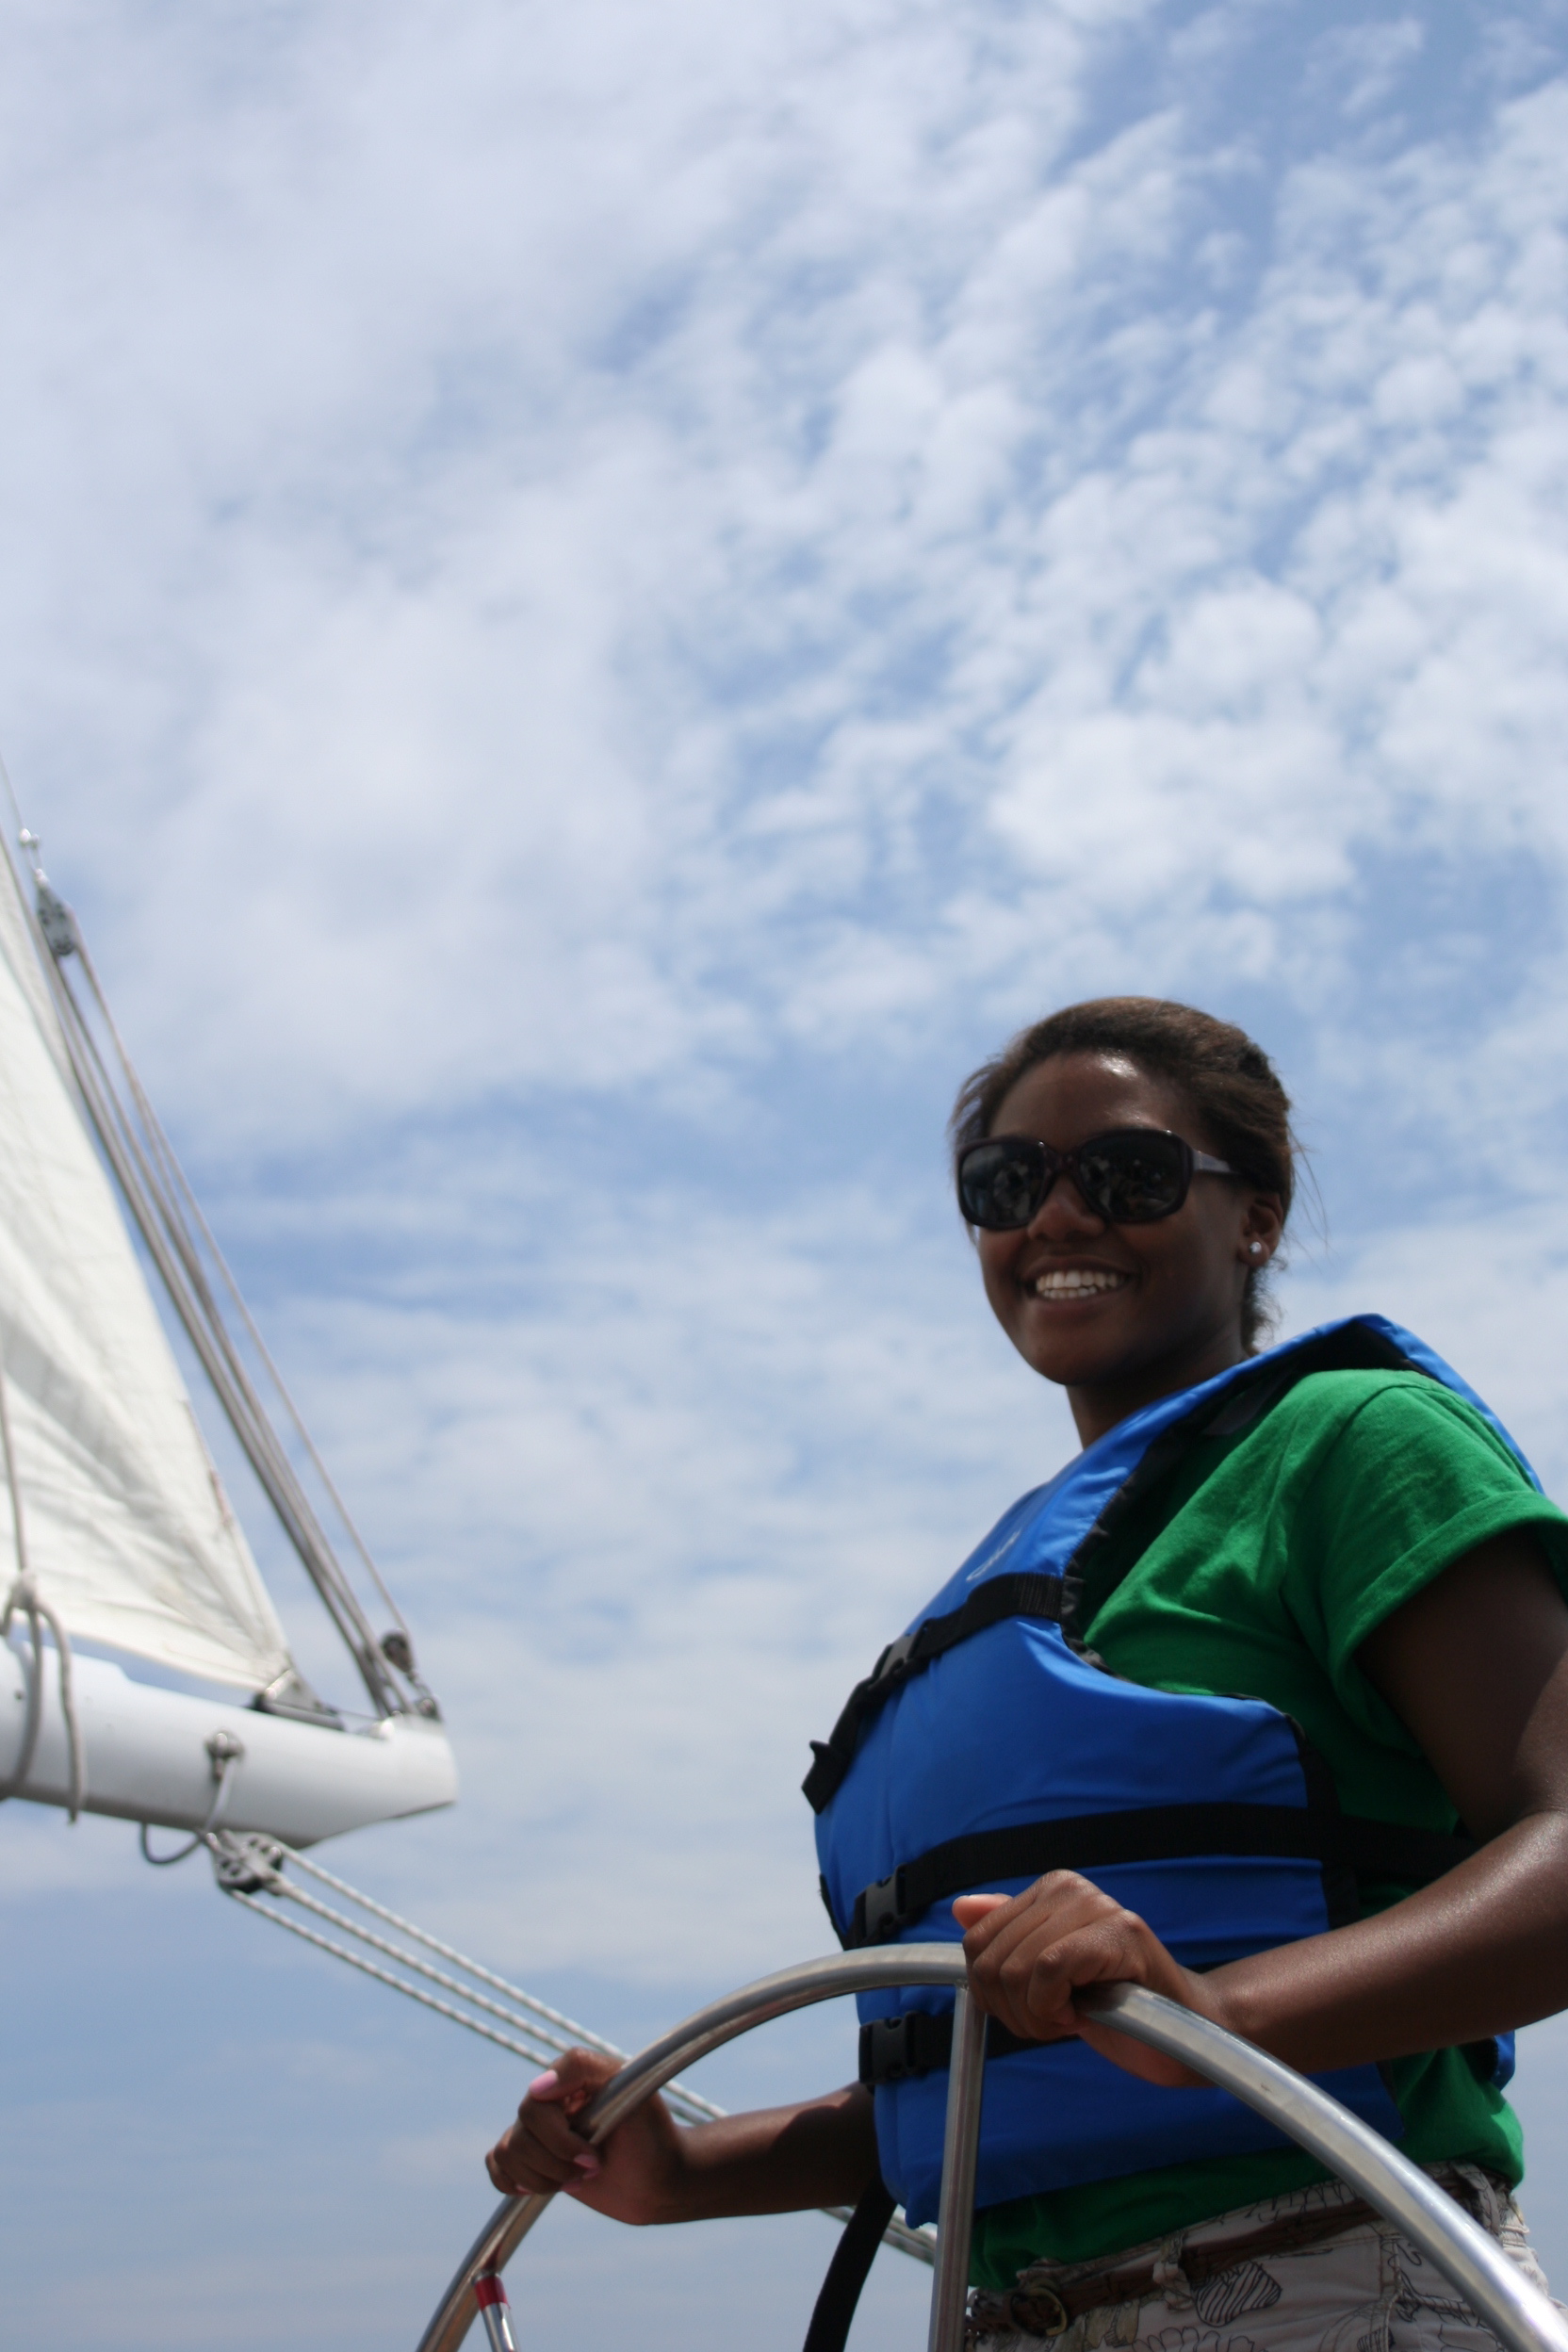 Smiling and sailing at the helm